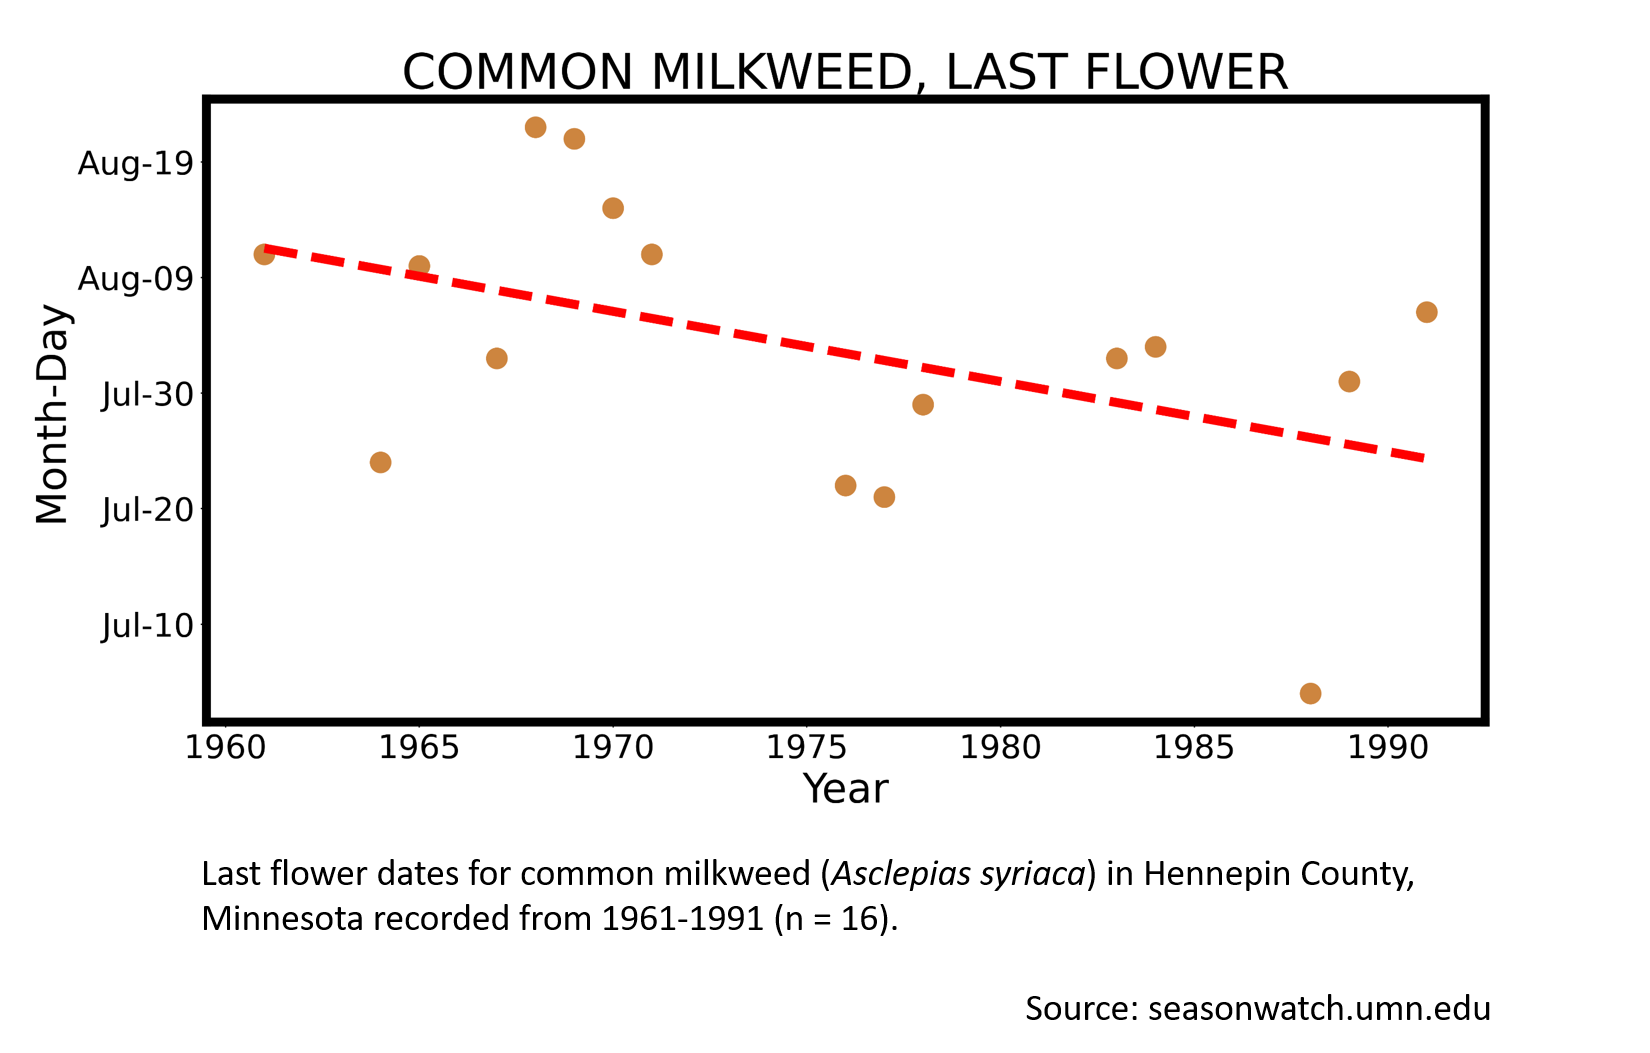 Scatterplot showing common milkweed phenology observations in Hennepin County, Minnesota